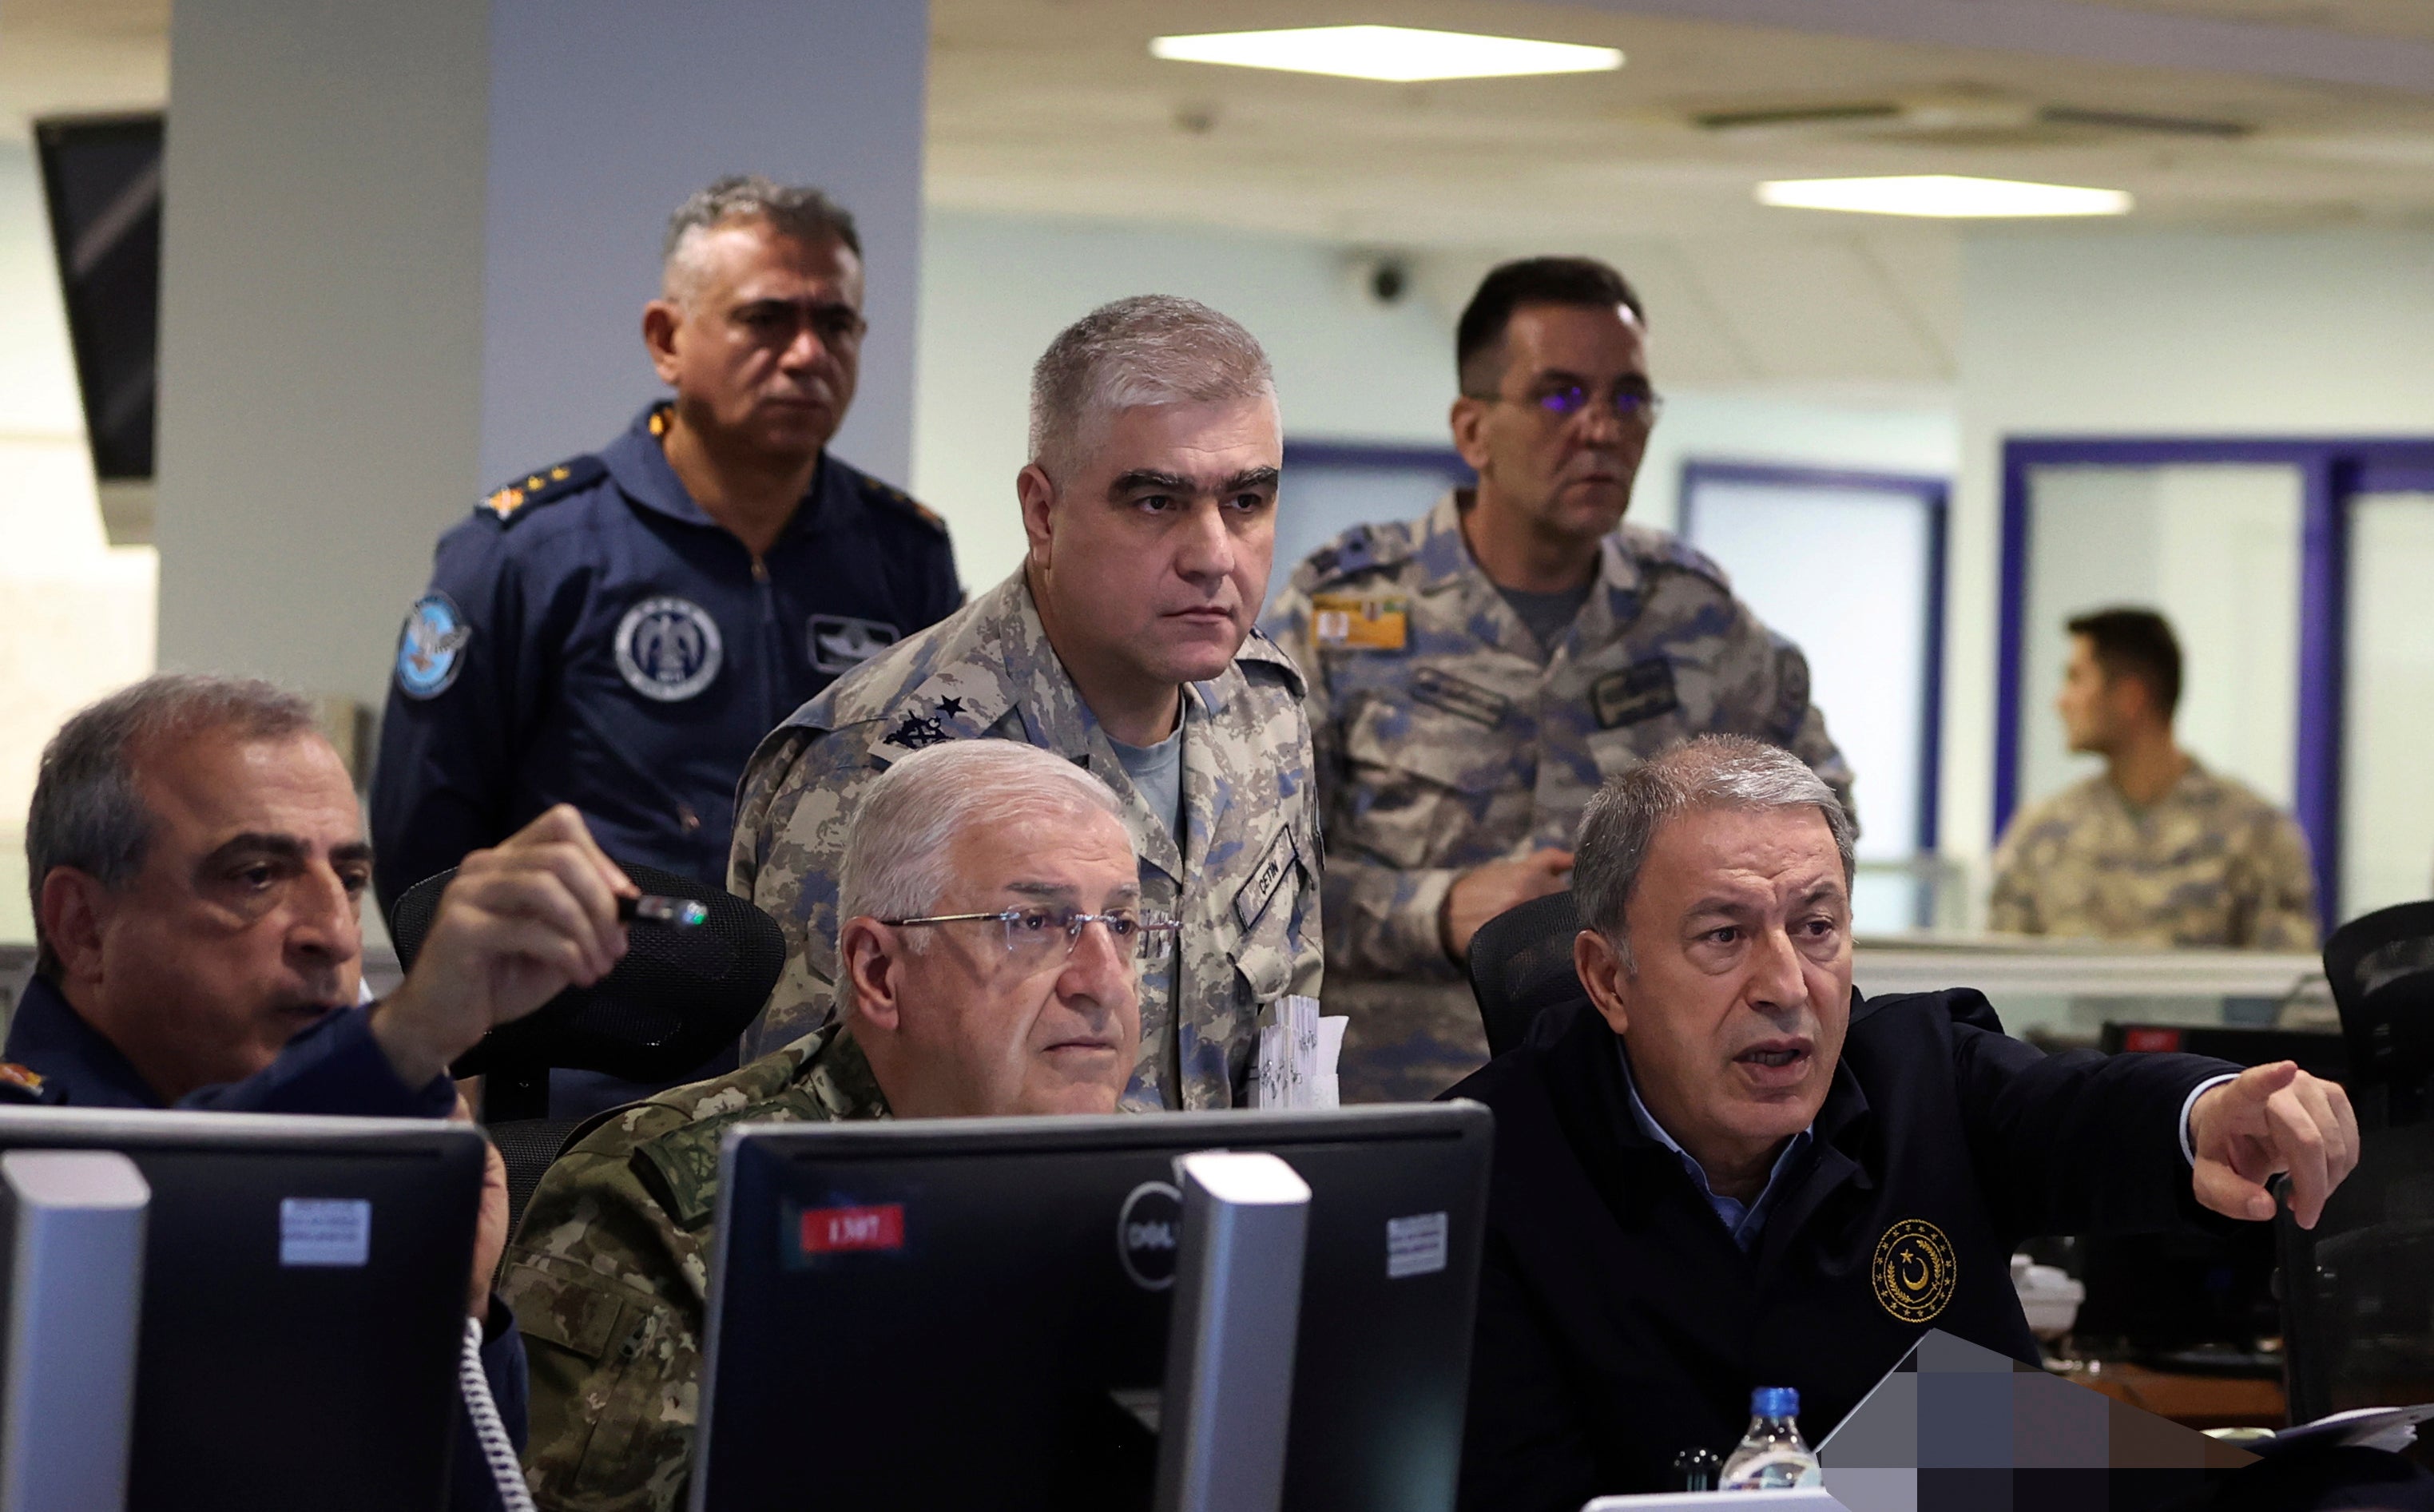 Defence minister Hulusi Akar, right, speaks to top army commanders at the air force command centre in Ankara